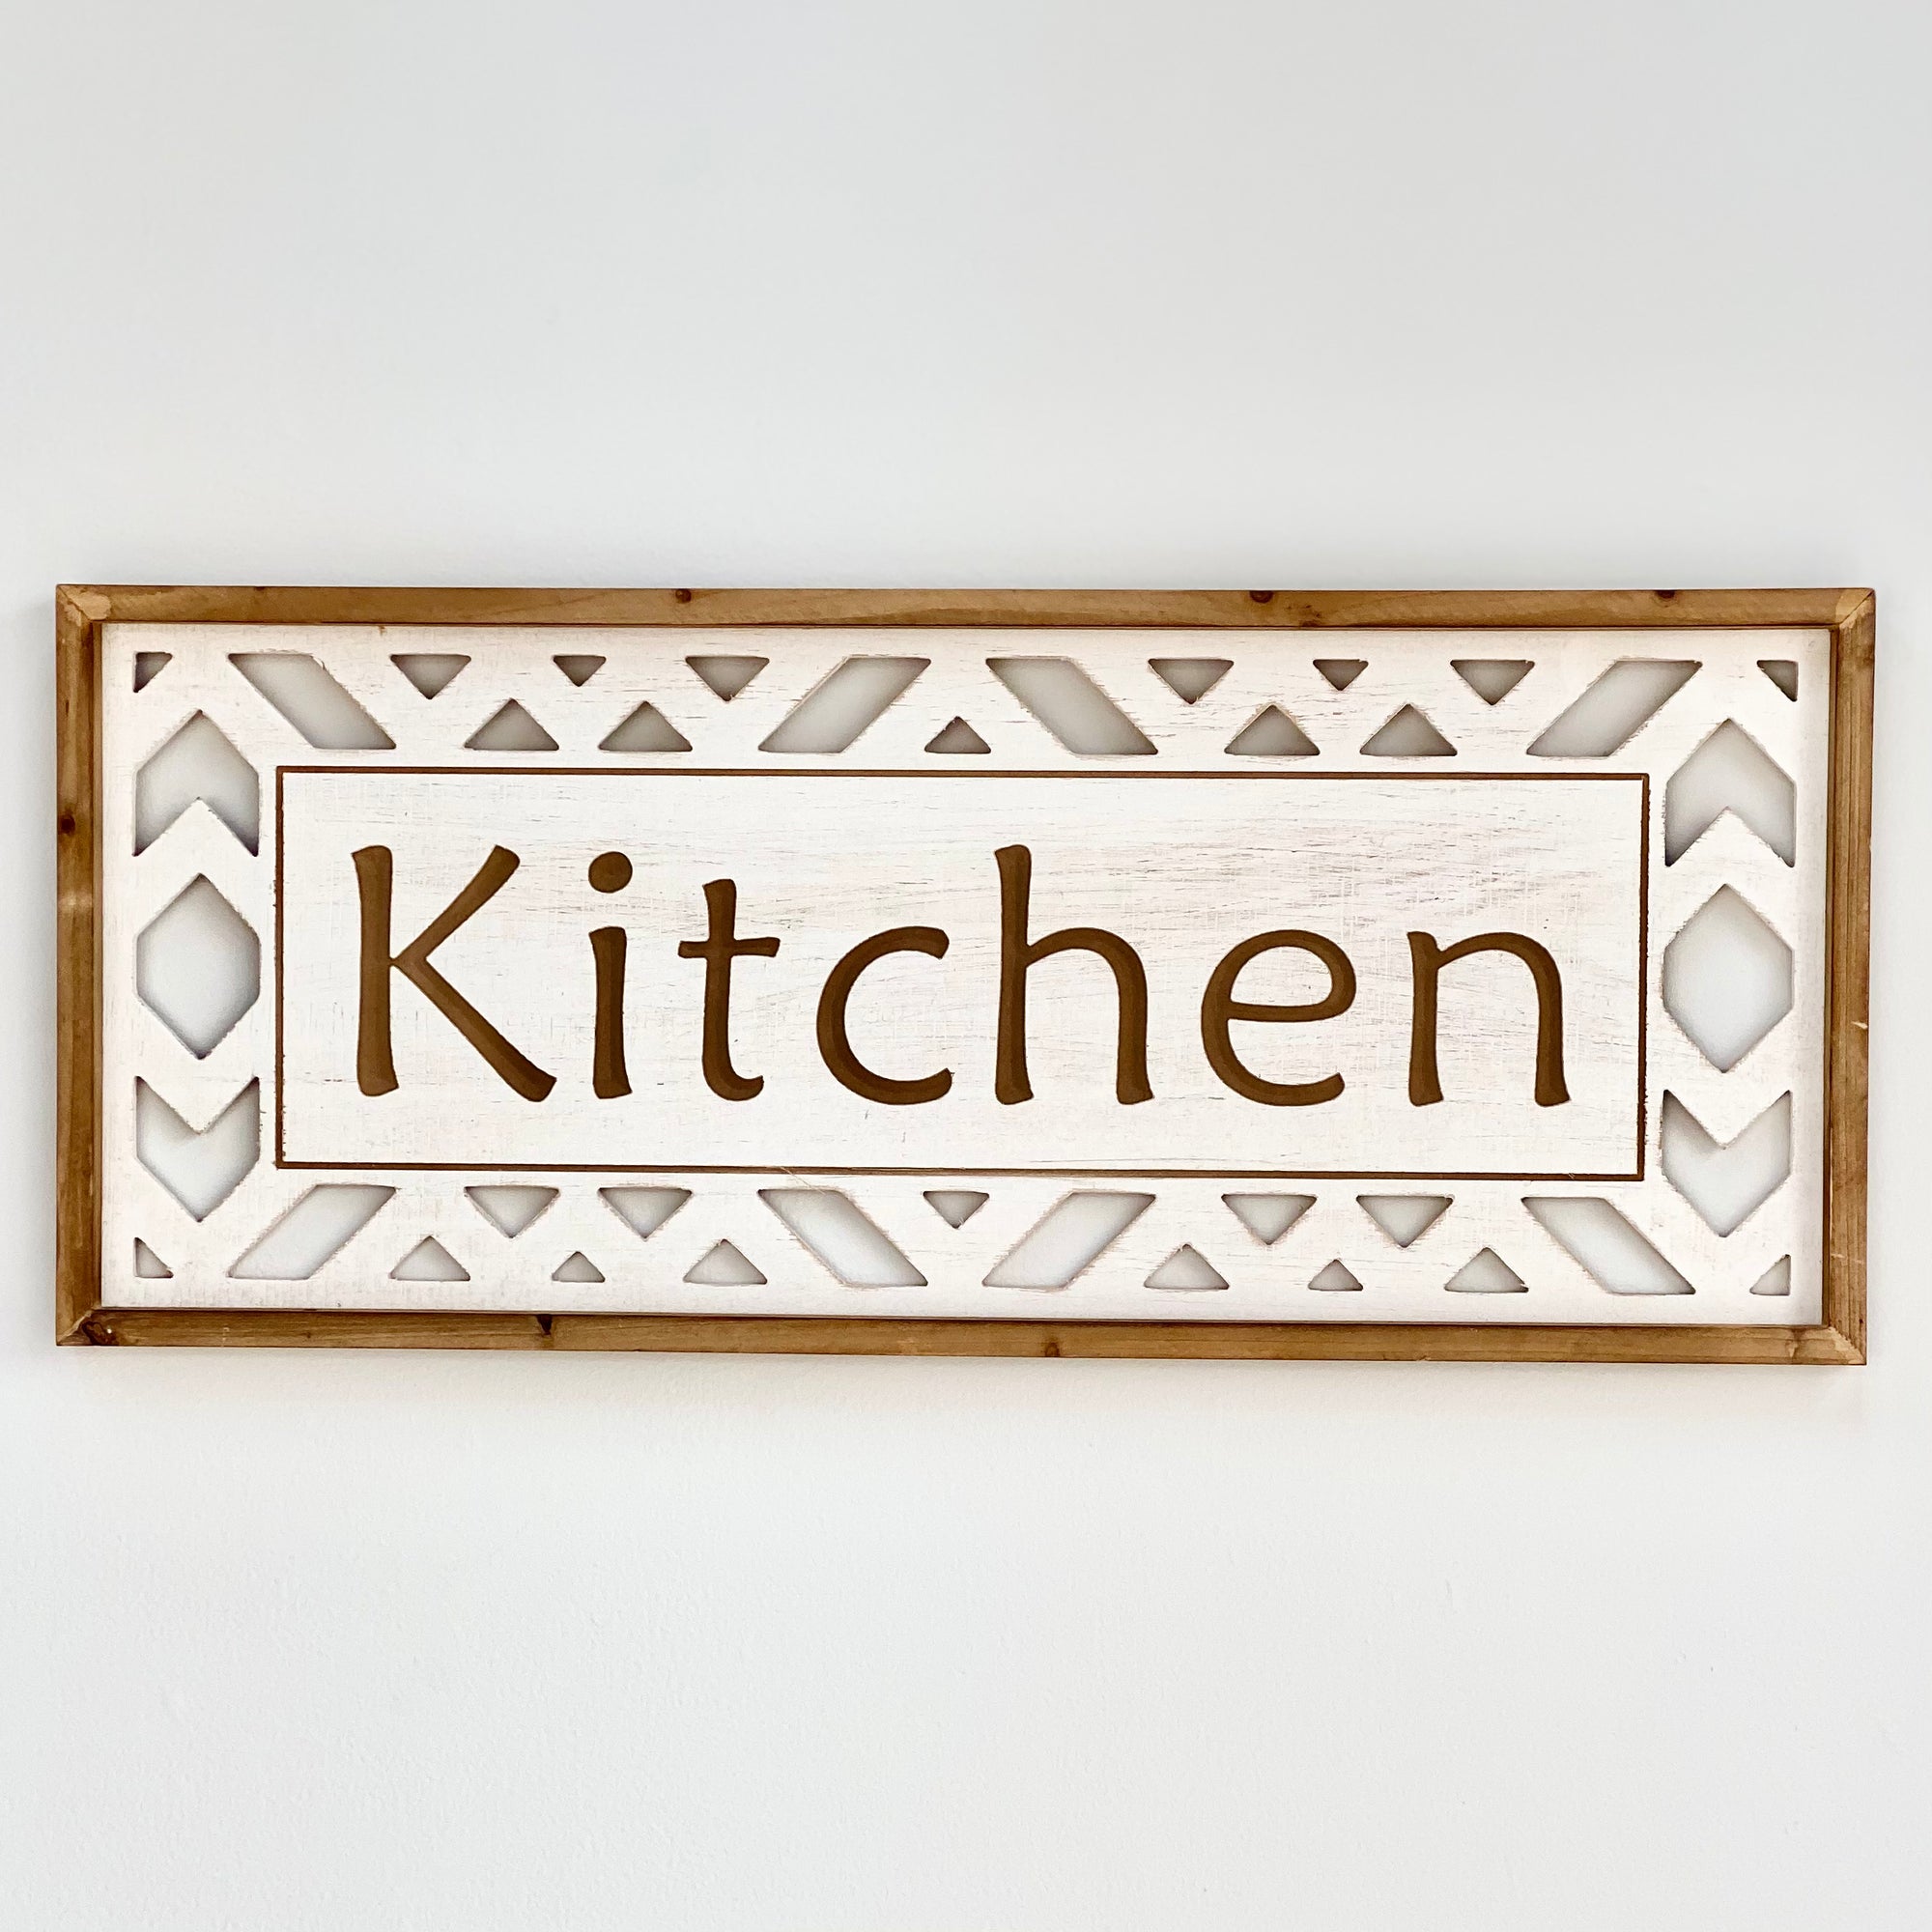 Wood Wall Art with Cutout and "Kitchen" Carved Writing Painted White Finish